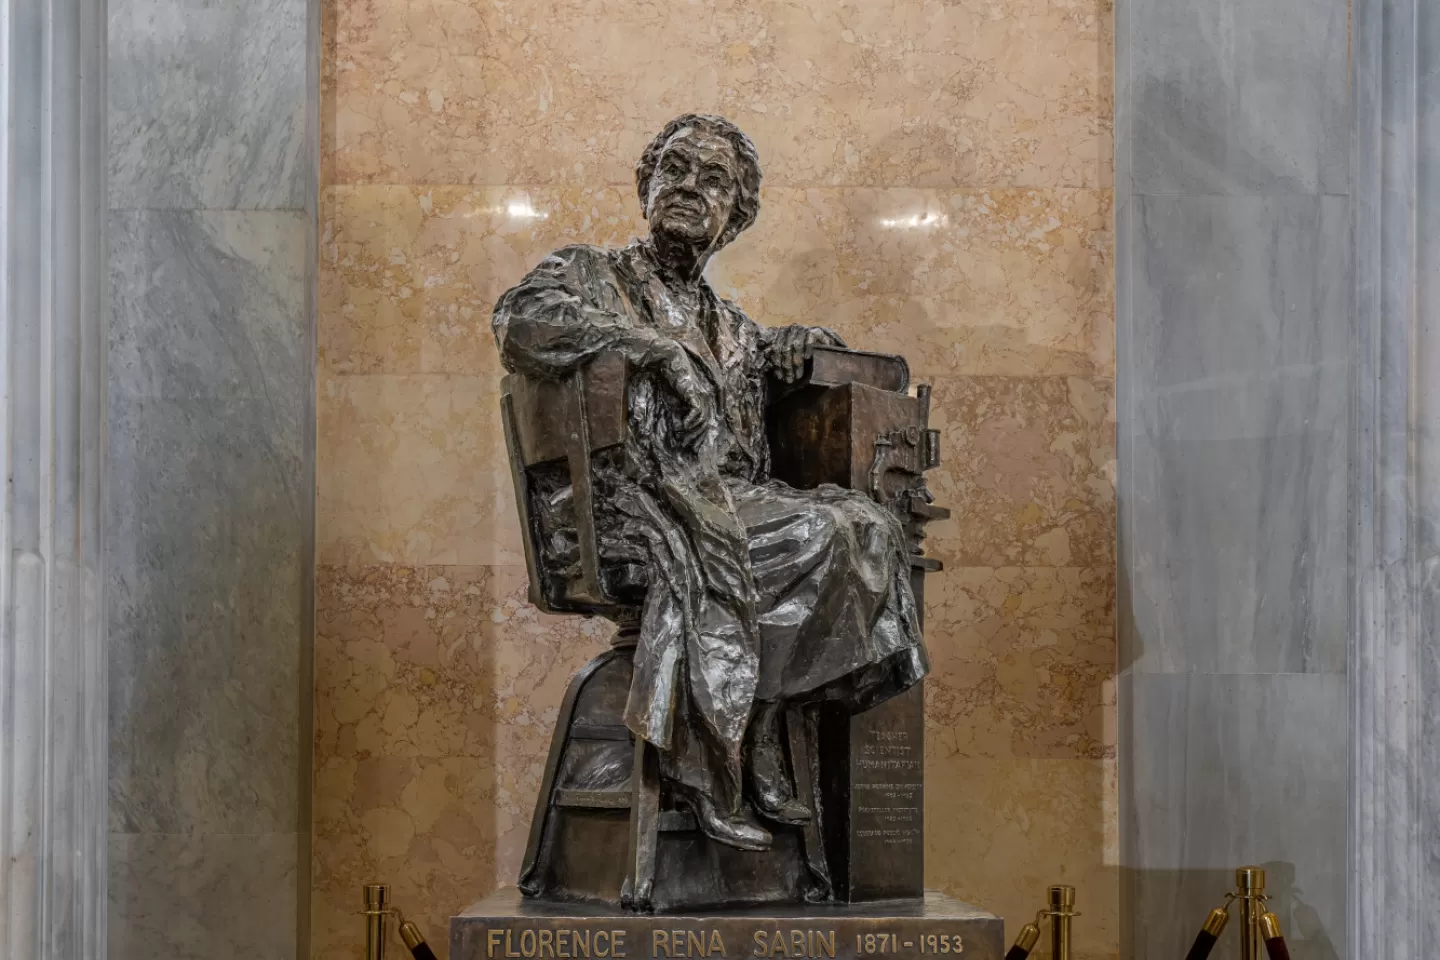 Bronze statue of a person sitting.